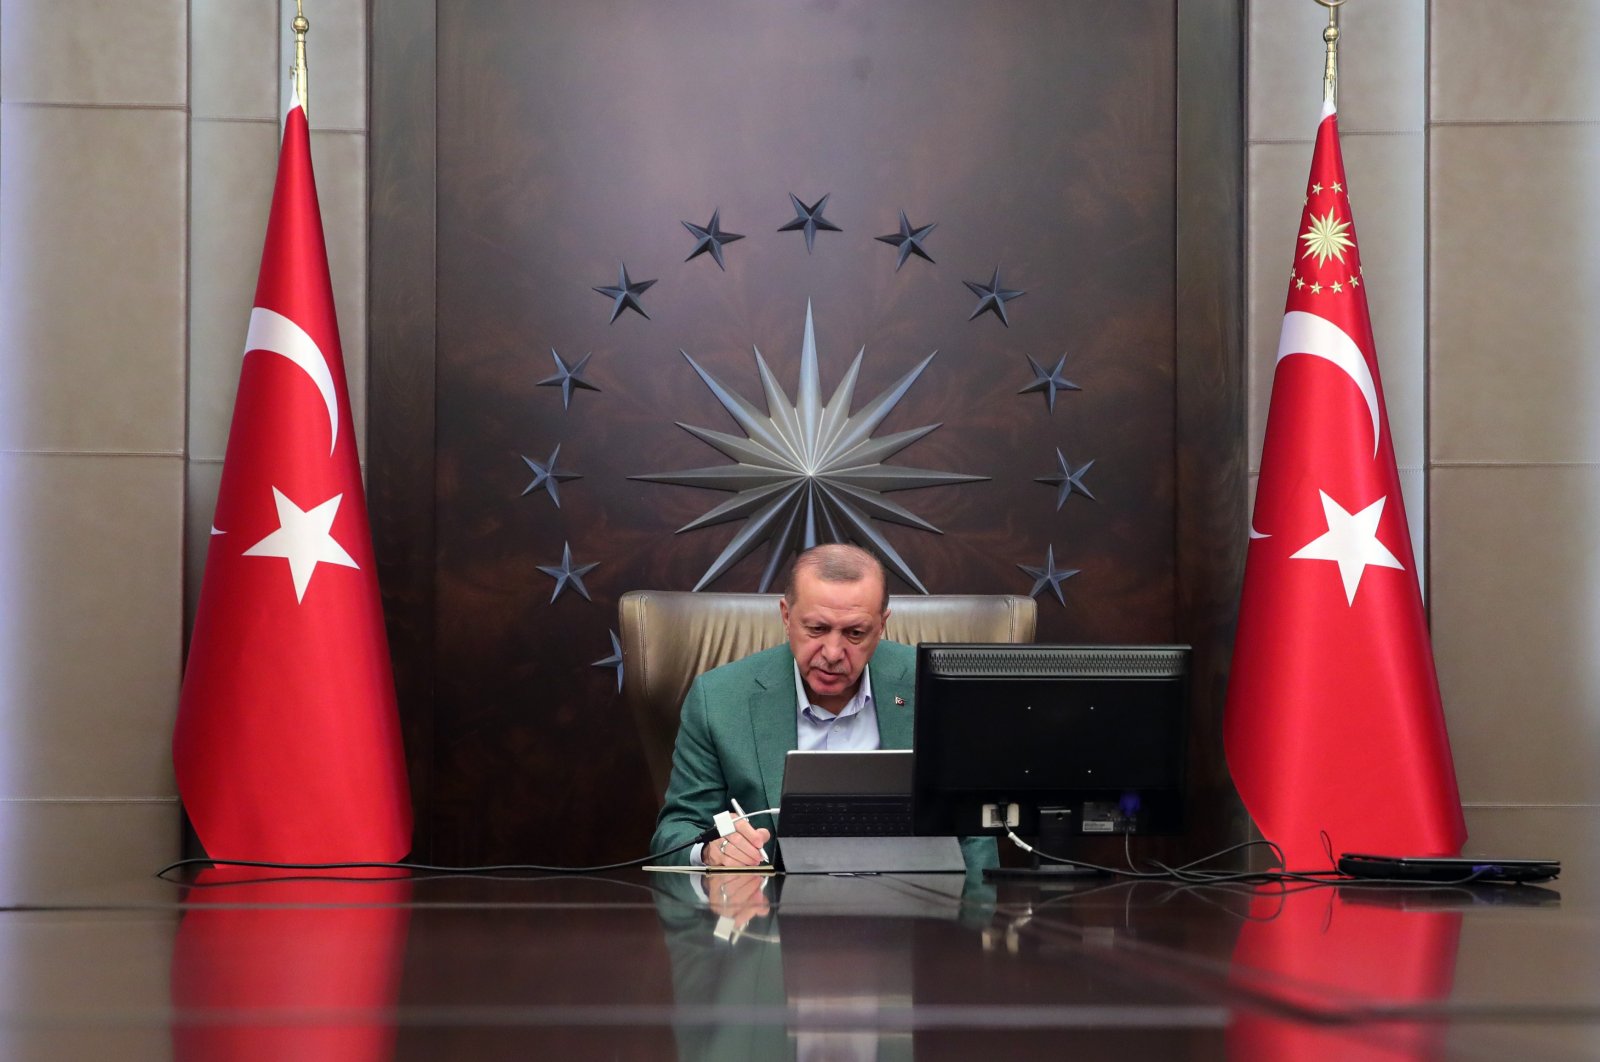 President Recep Tayyip Erdoğan participates in a teleconference with his Cabinet amid the coronavirus outbreak, in Ankara, Turkey, Monday, March 23, 2020. (IHA Photo)